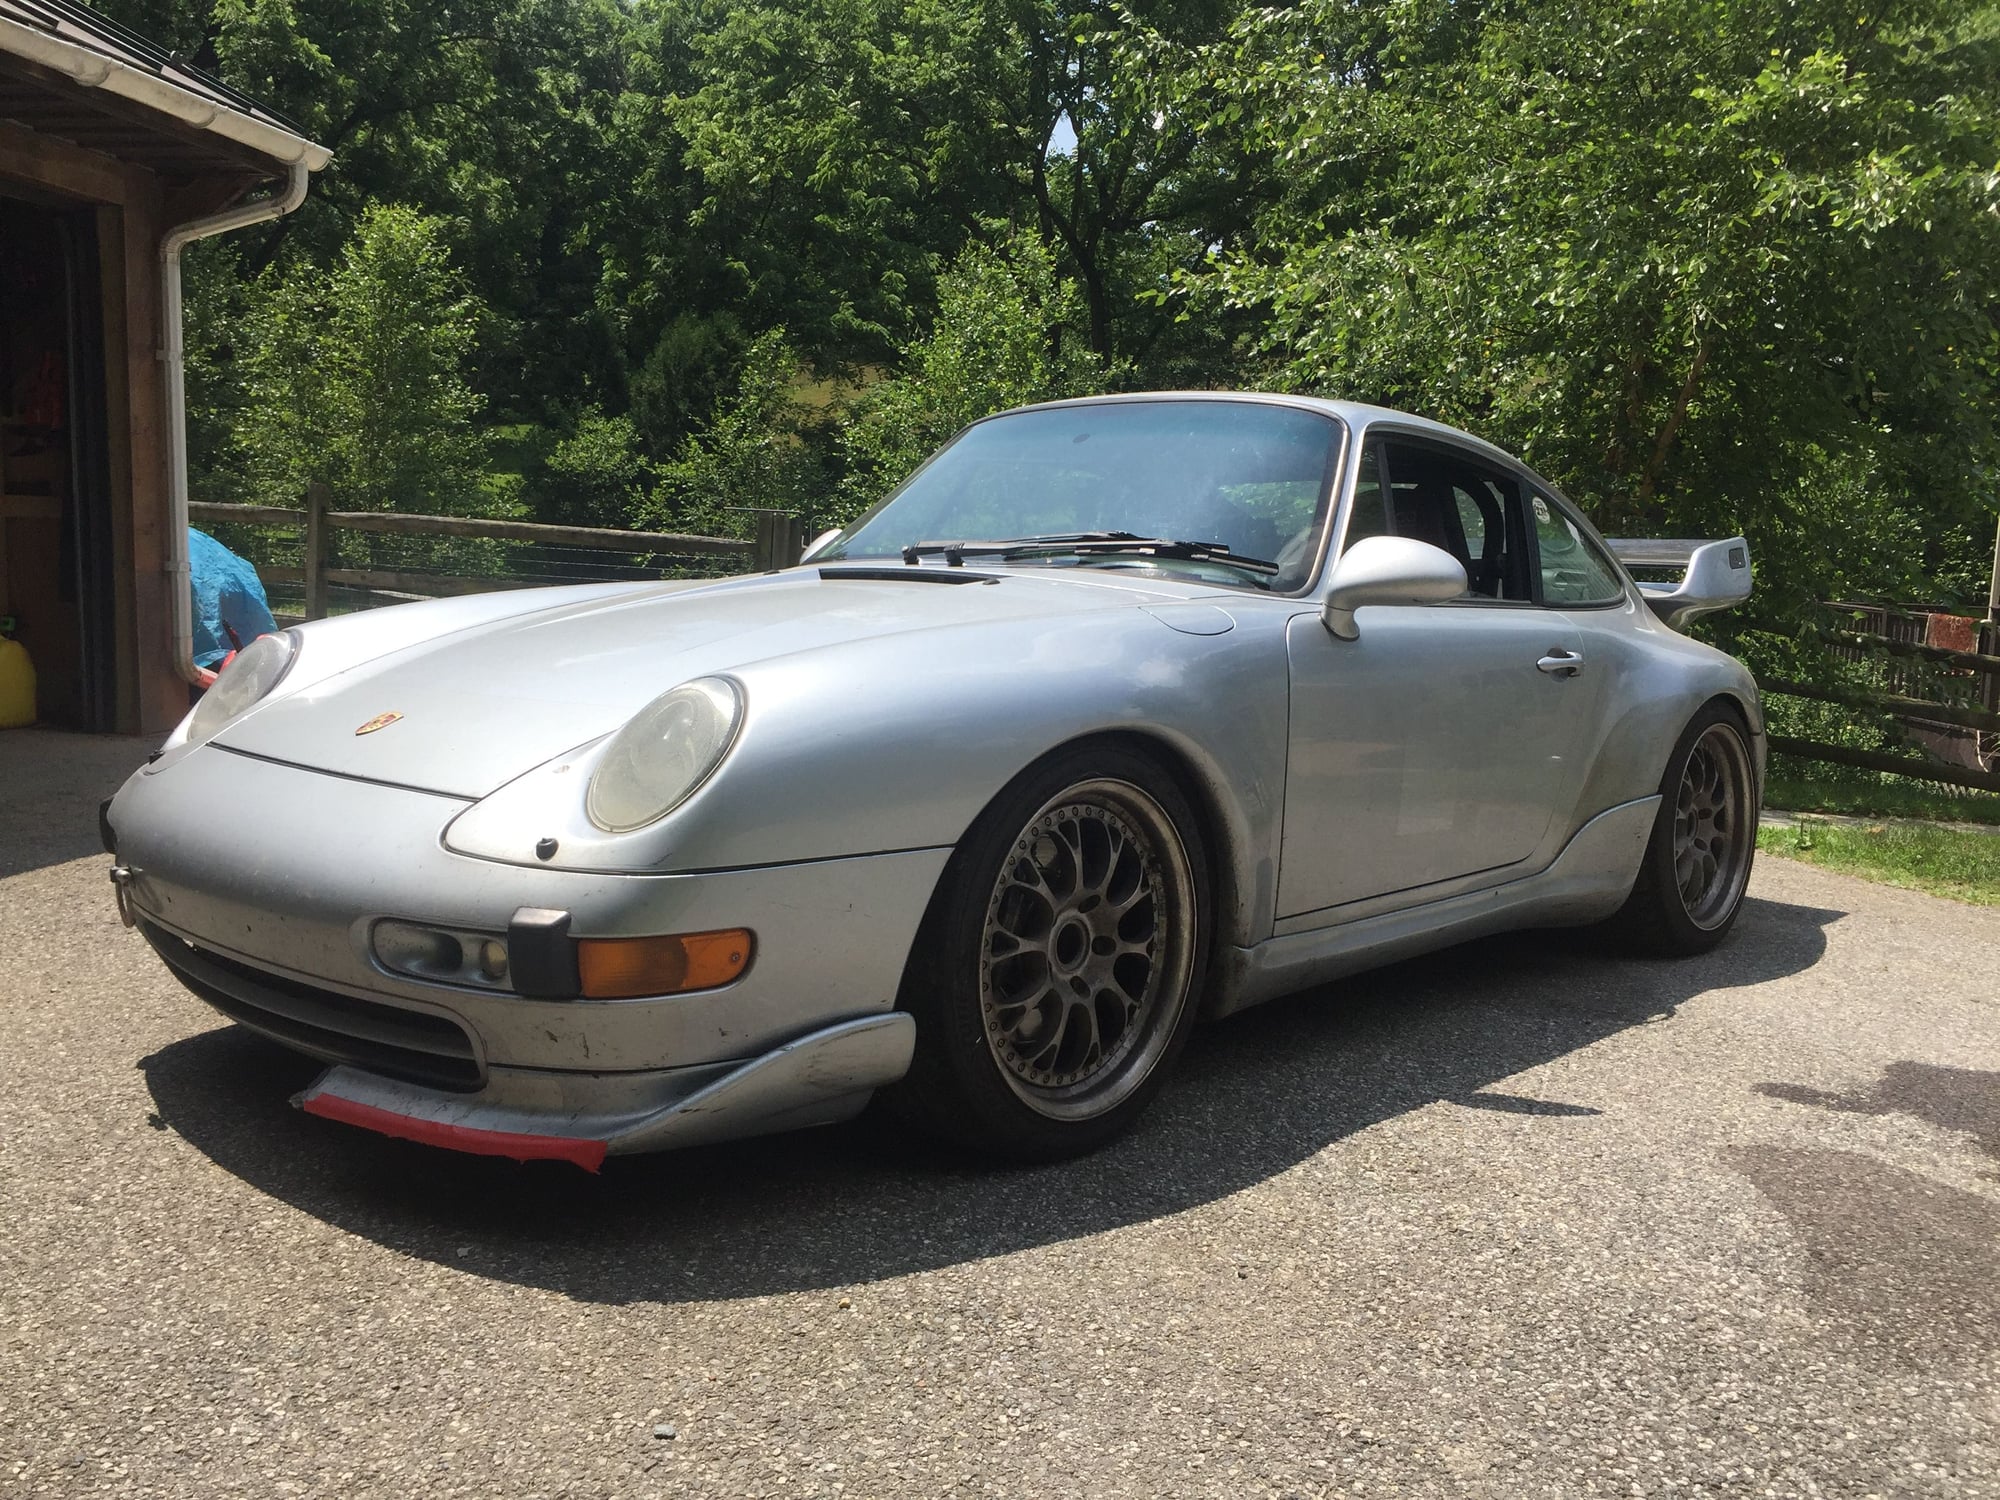 1995 Porsche 911 - Porsche 993 Carrera street and track car - Used - VIN WP0AA2995SS320775 - 57,127 Miles - 6 cyl - 2WD - Manual - Coupe - Silver - Cochranville, PA 19330, United States